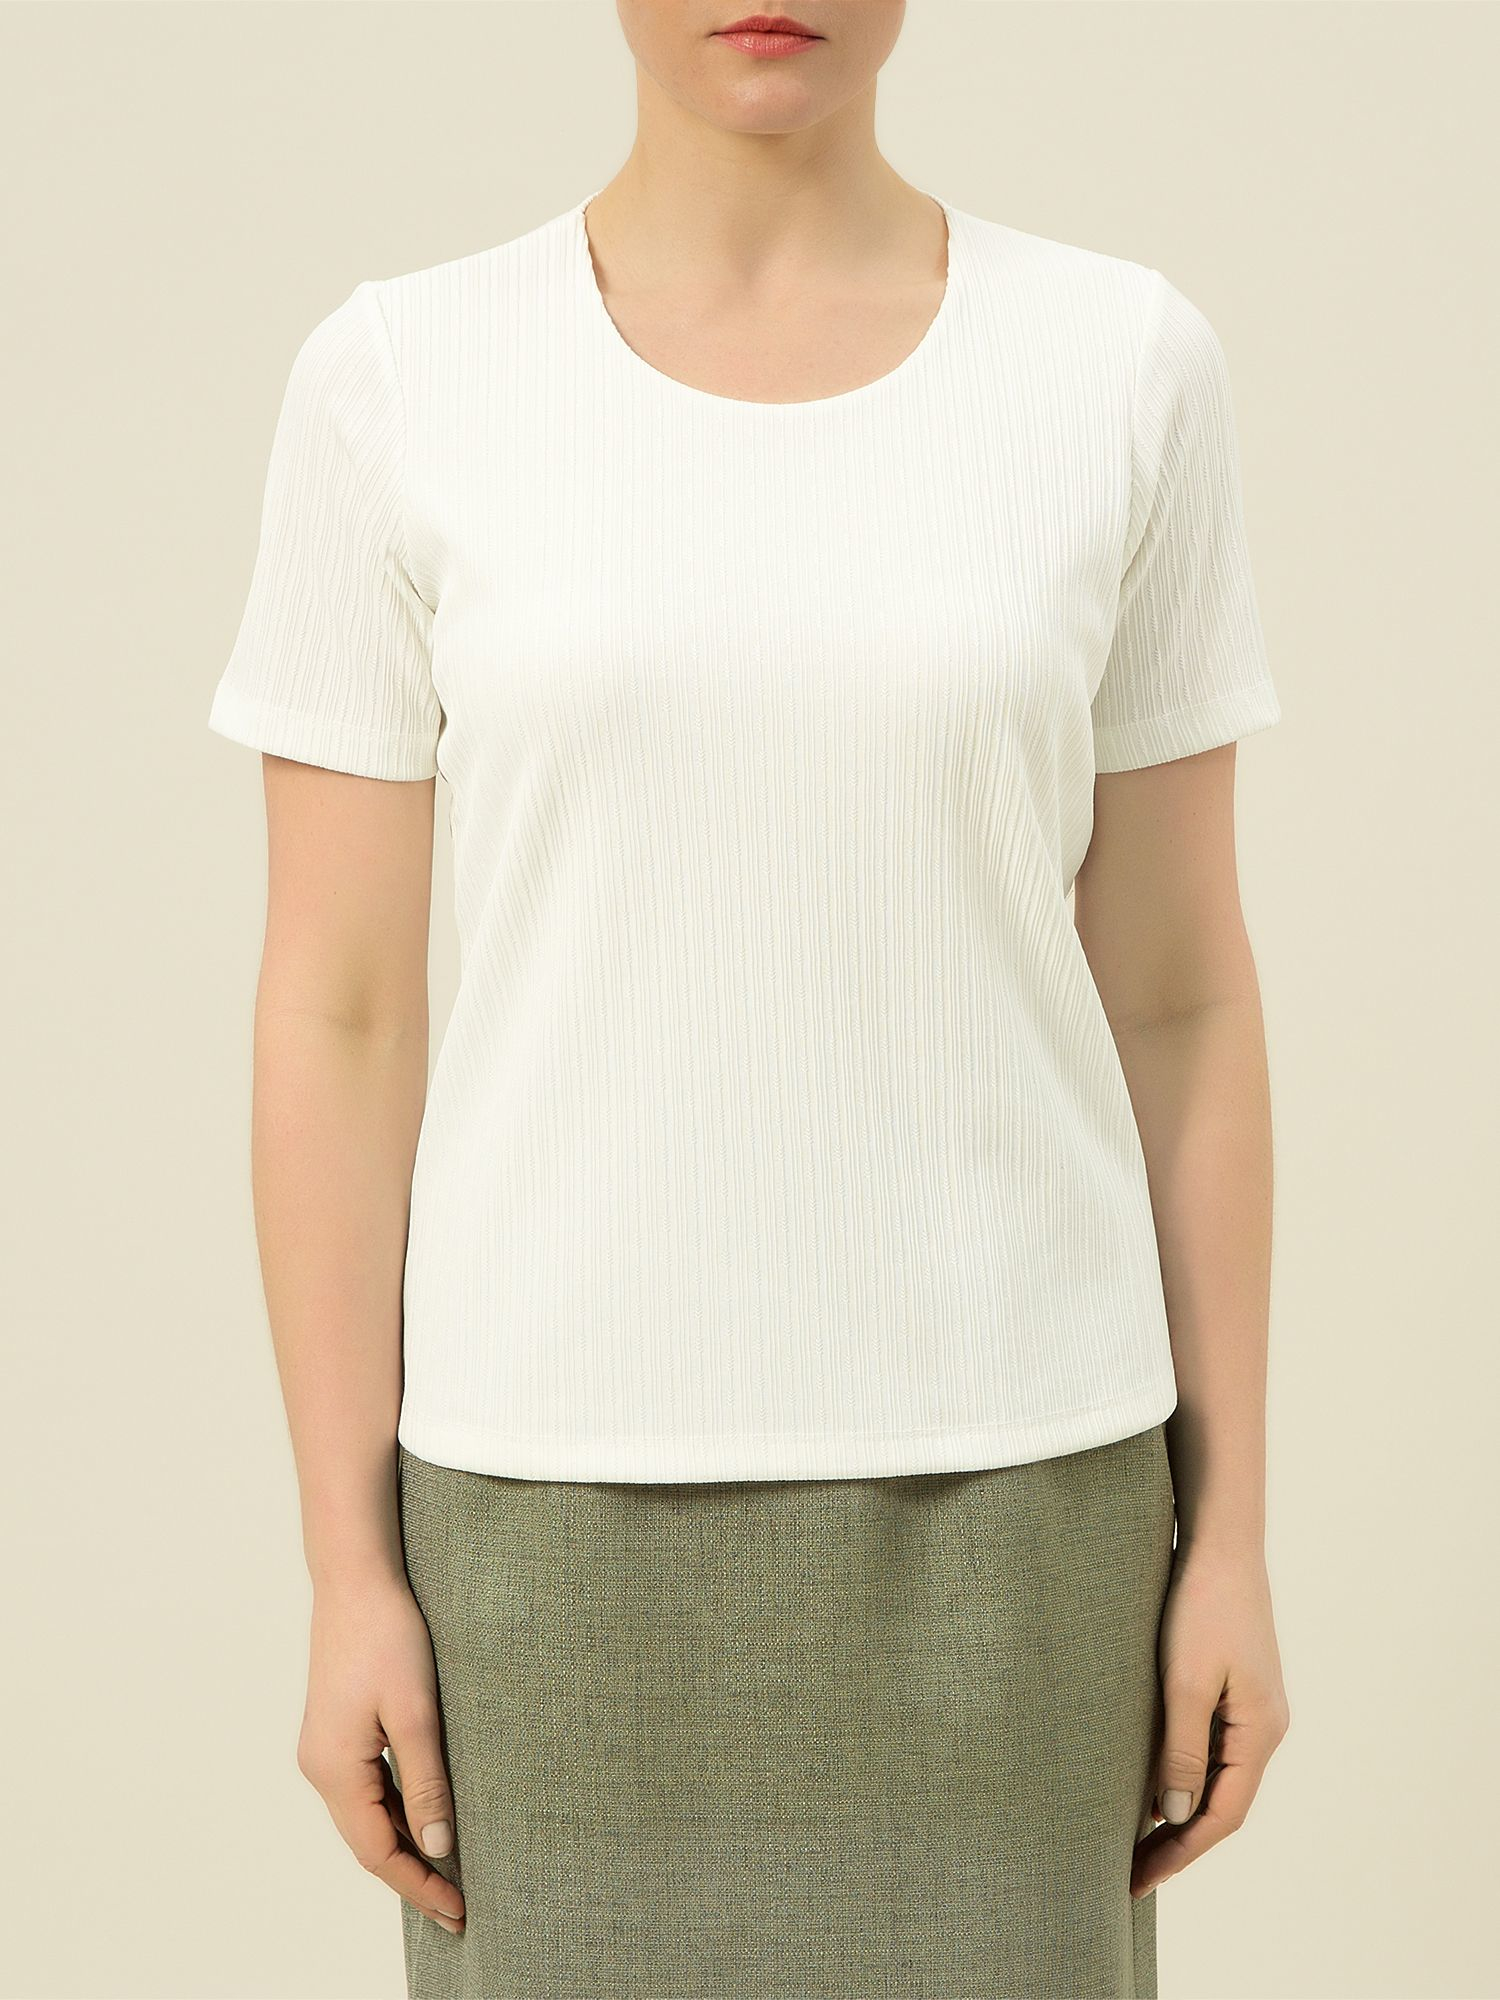 Eastex Round Neck Pique Top in Natural | Lyst